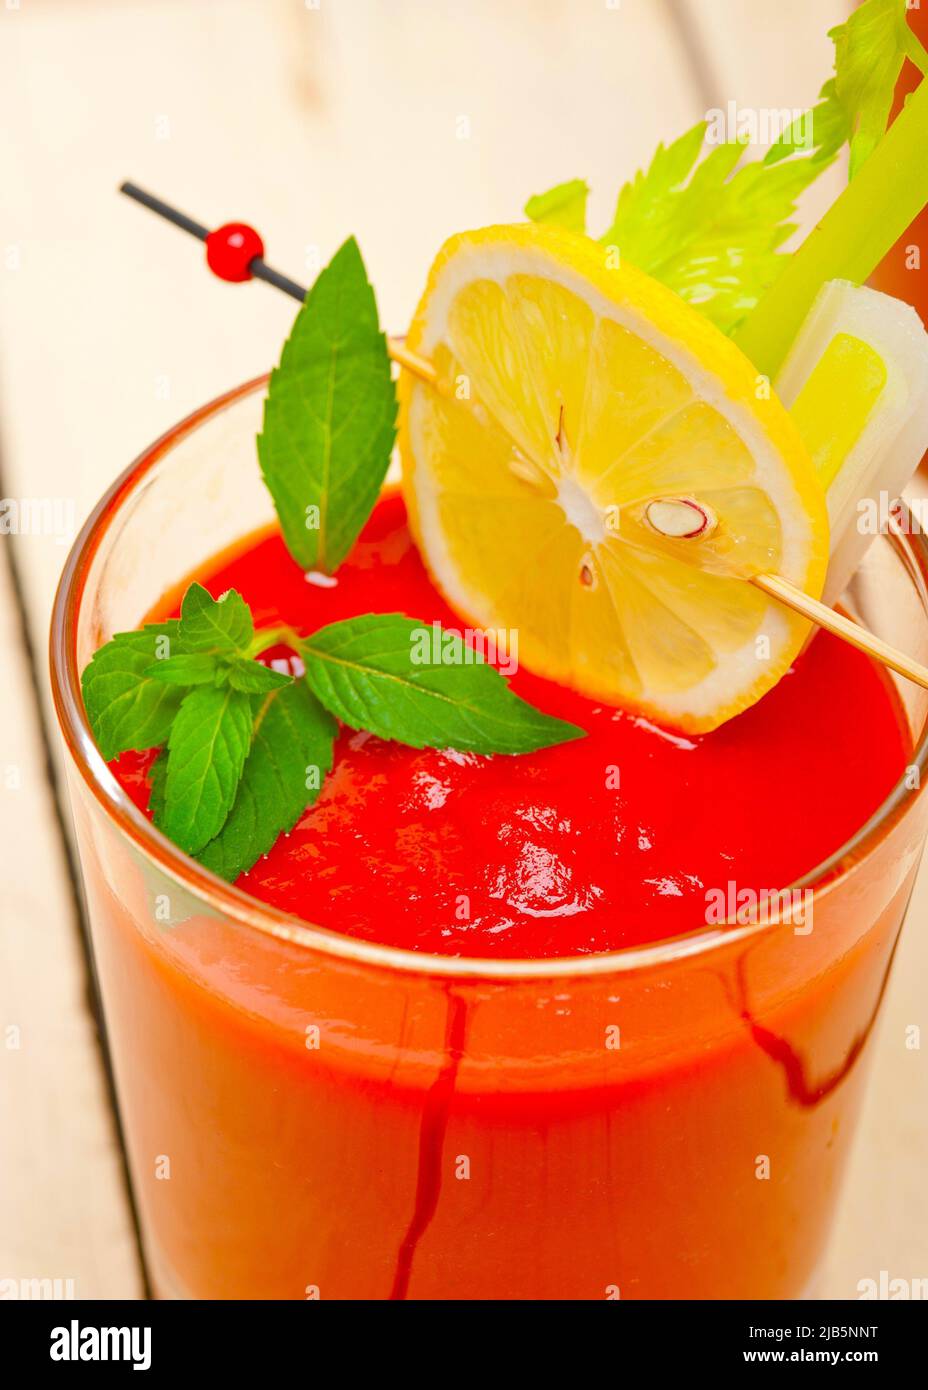 fresh tomato juice gazpacho soup on a glass over white wood table. Stock Photo